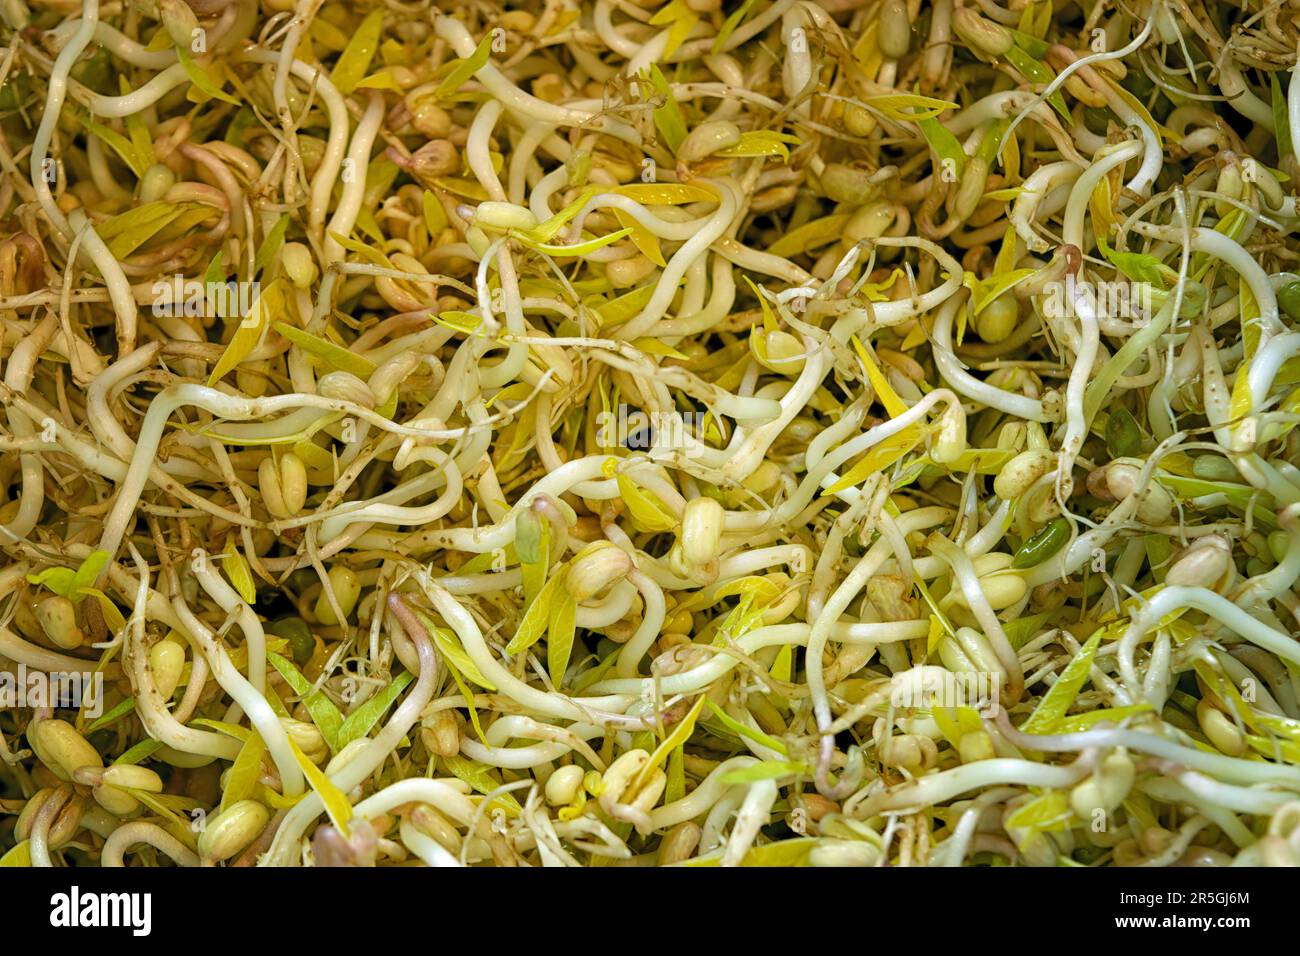 Hydroponically grown mung bean sprouts for culinary use. Sprouted mung ...